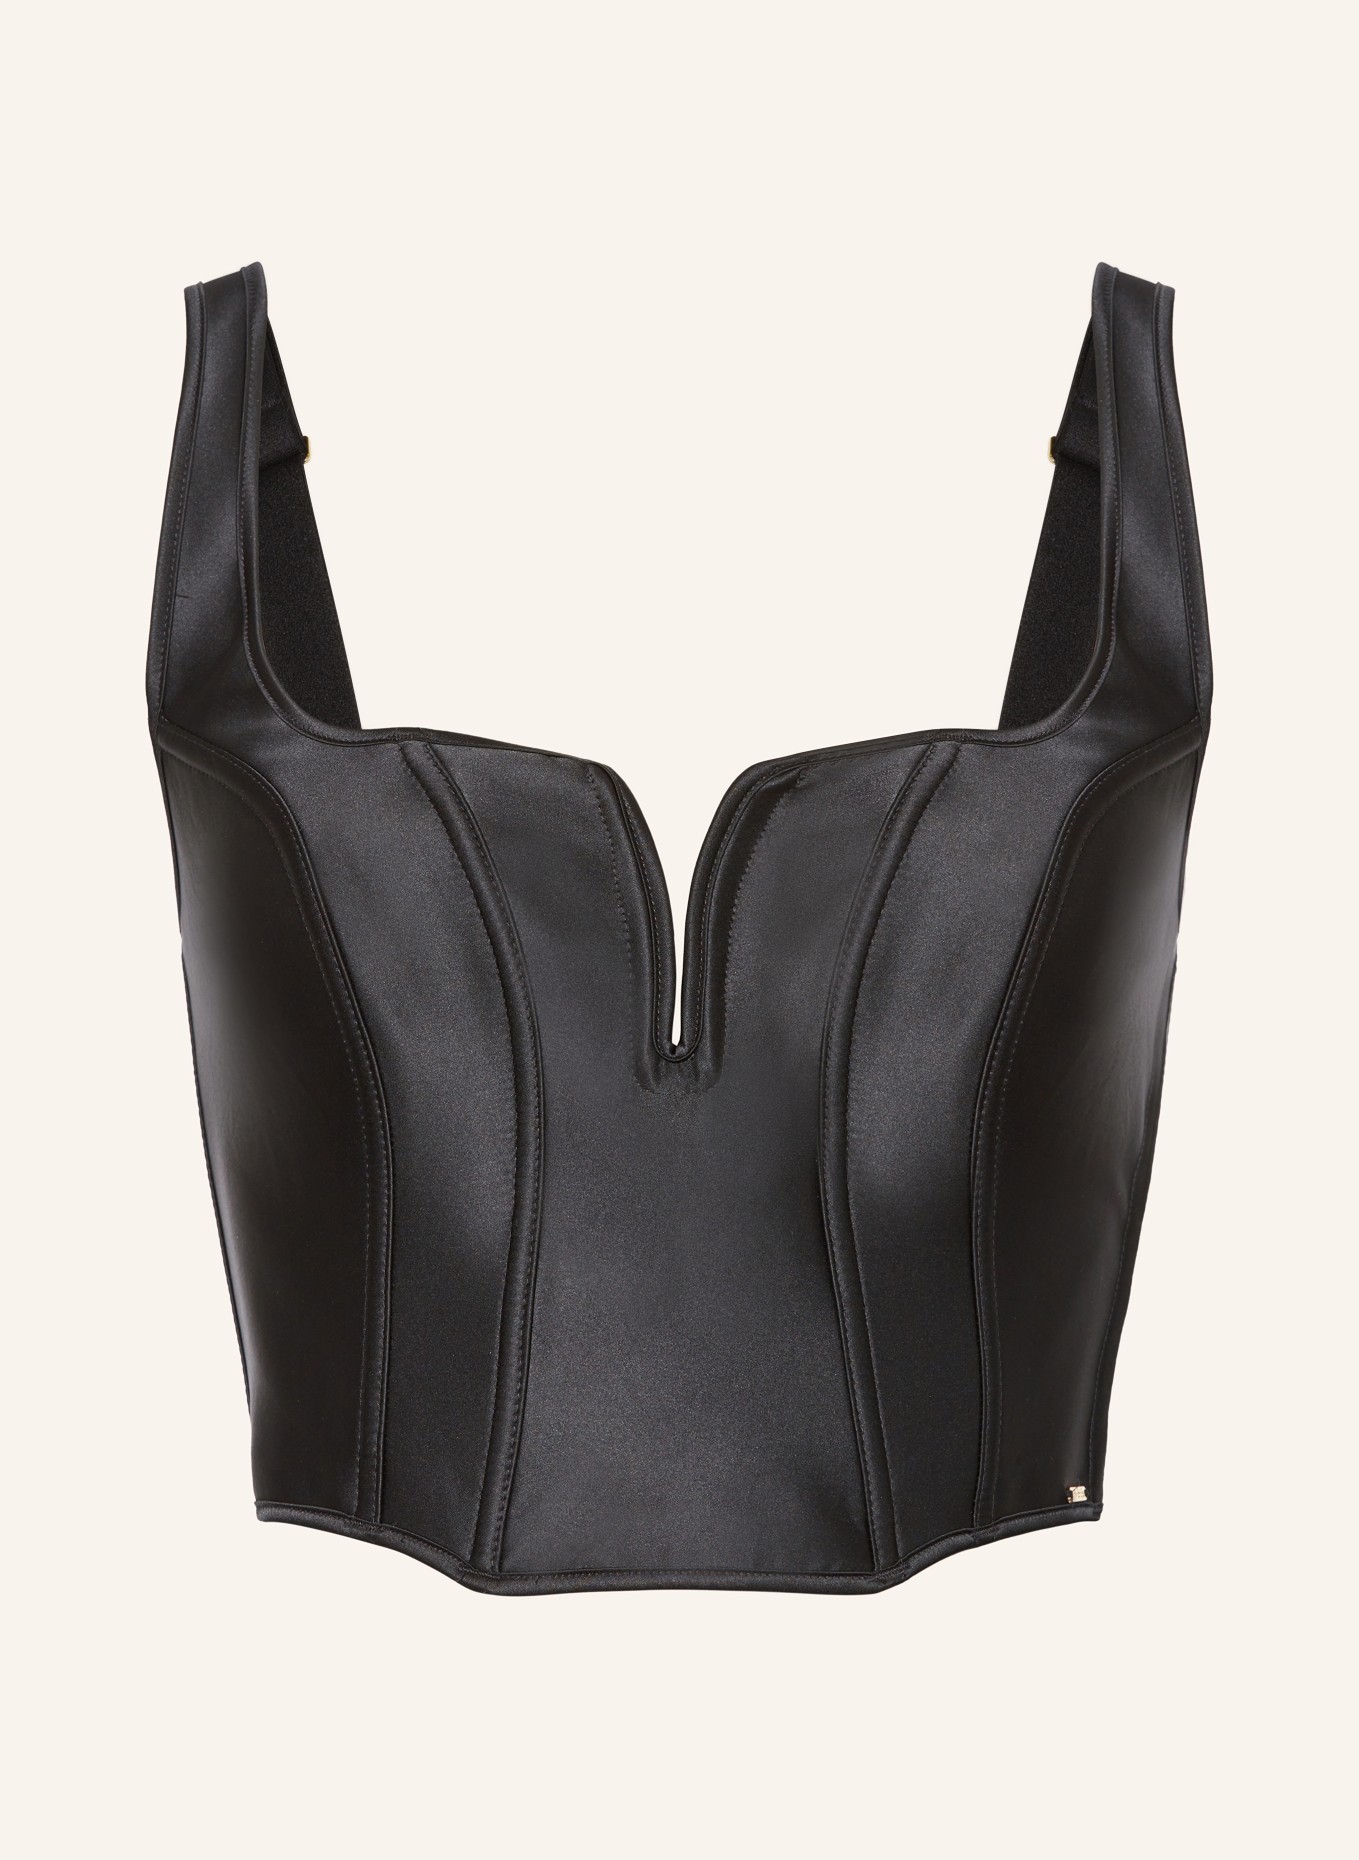 Aubade Corset ICONIC ALLURE made of satin in black